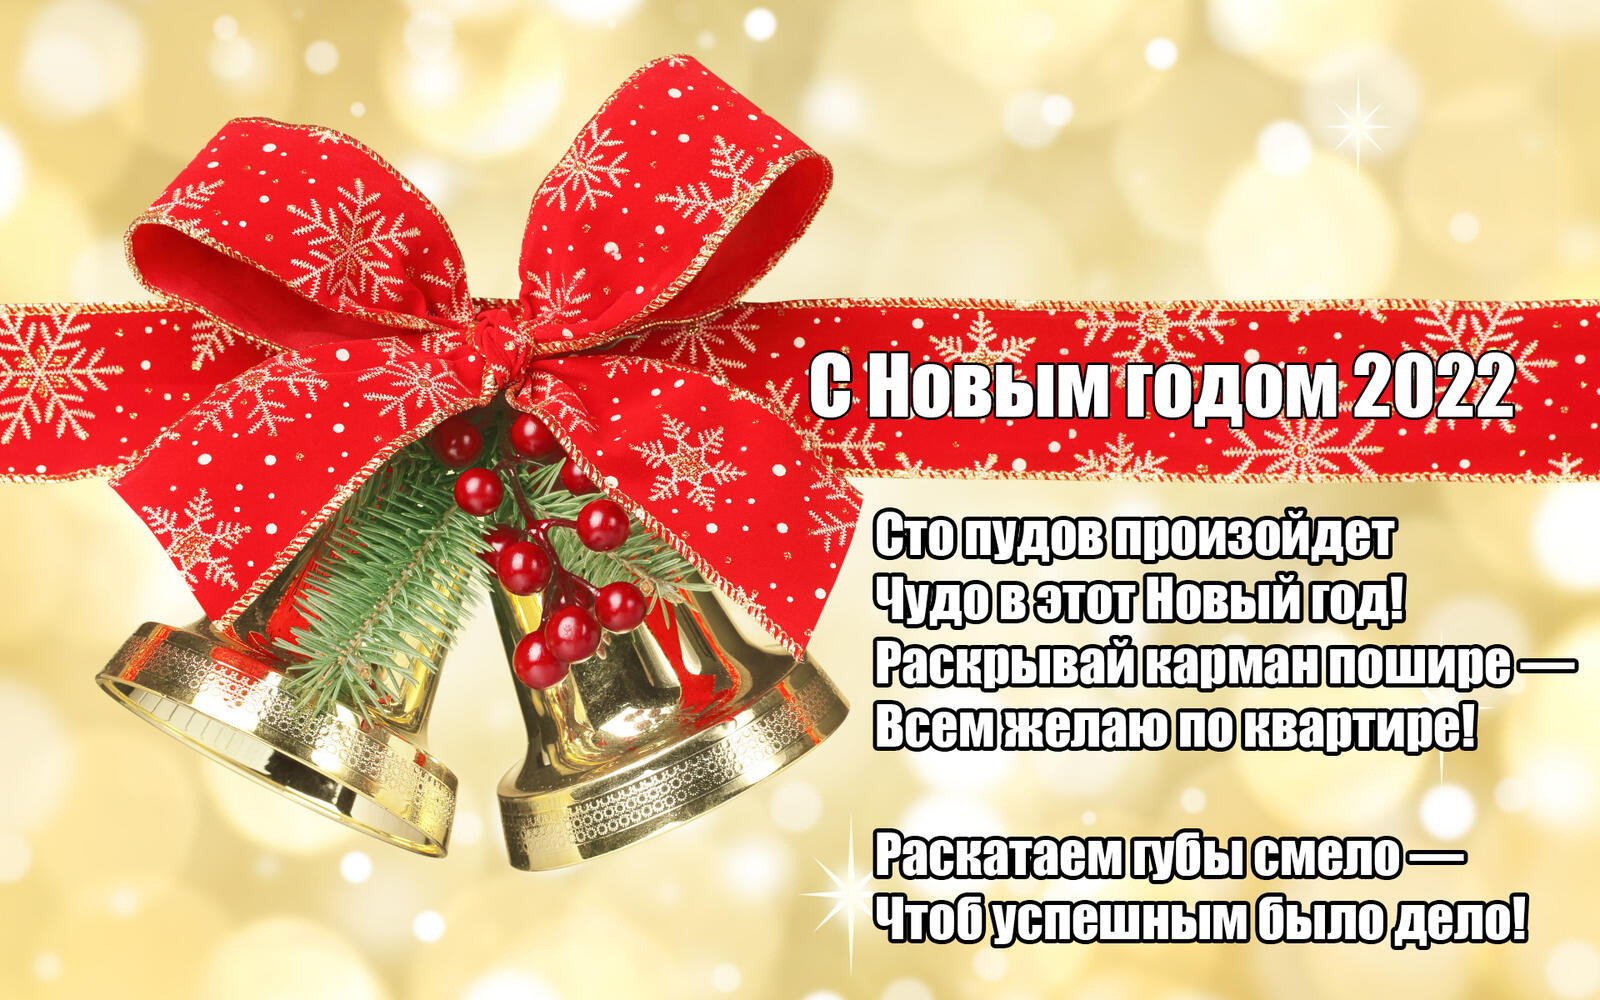 Wallpapers request happy new year 2022 holidays on the desktop